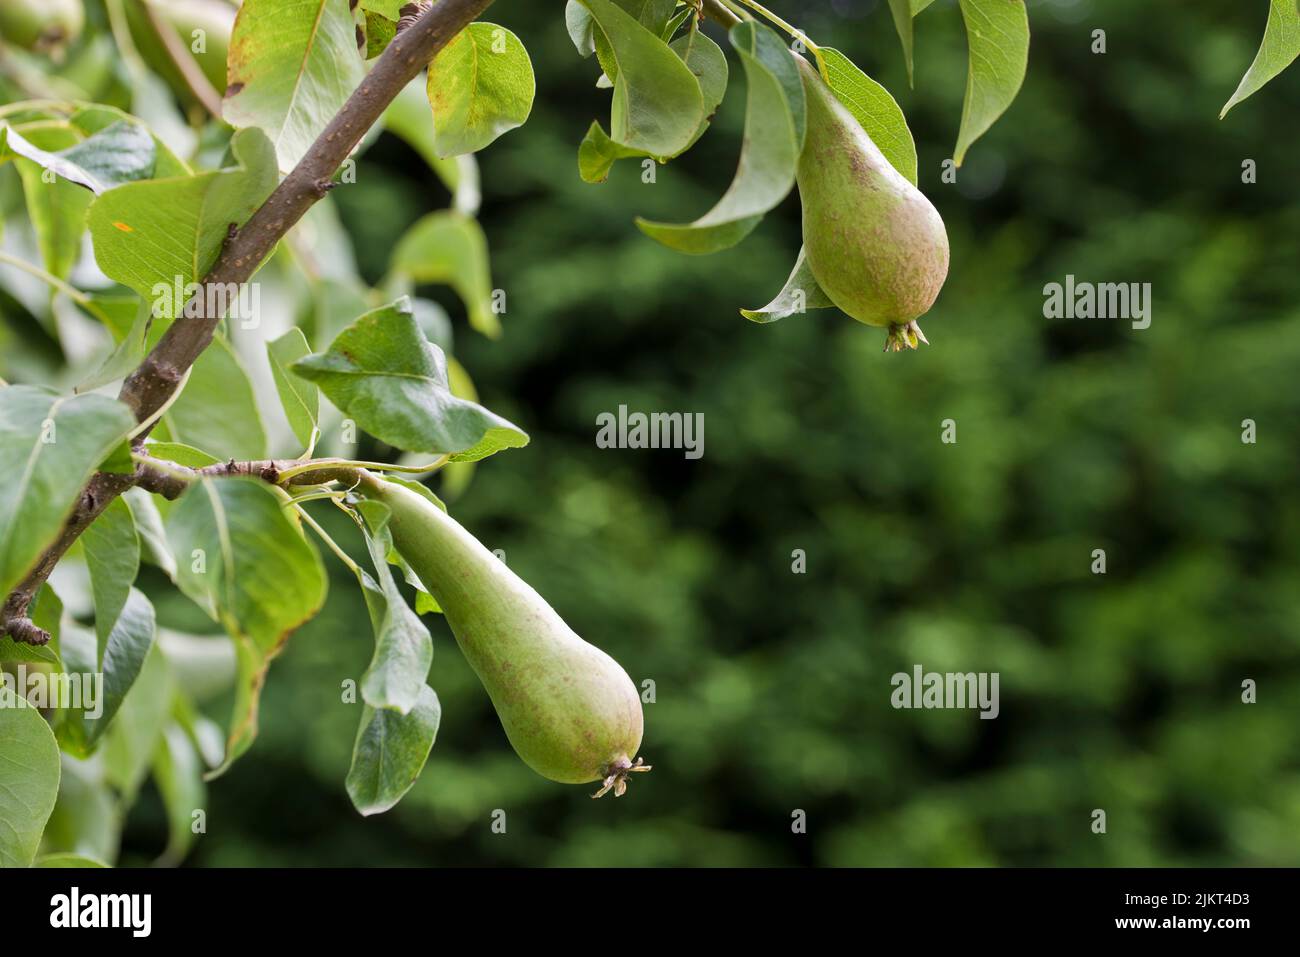 Maturing Conference pears Stock Photo